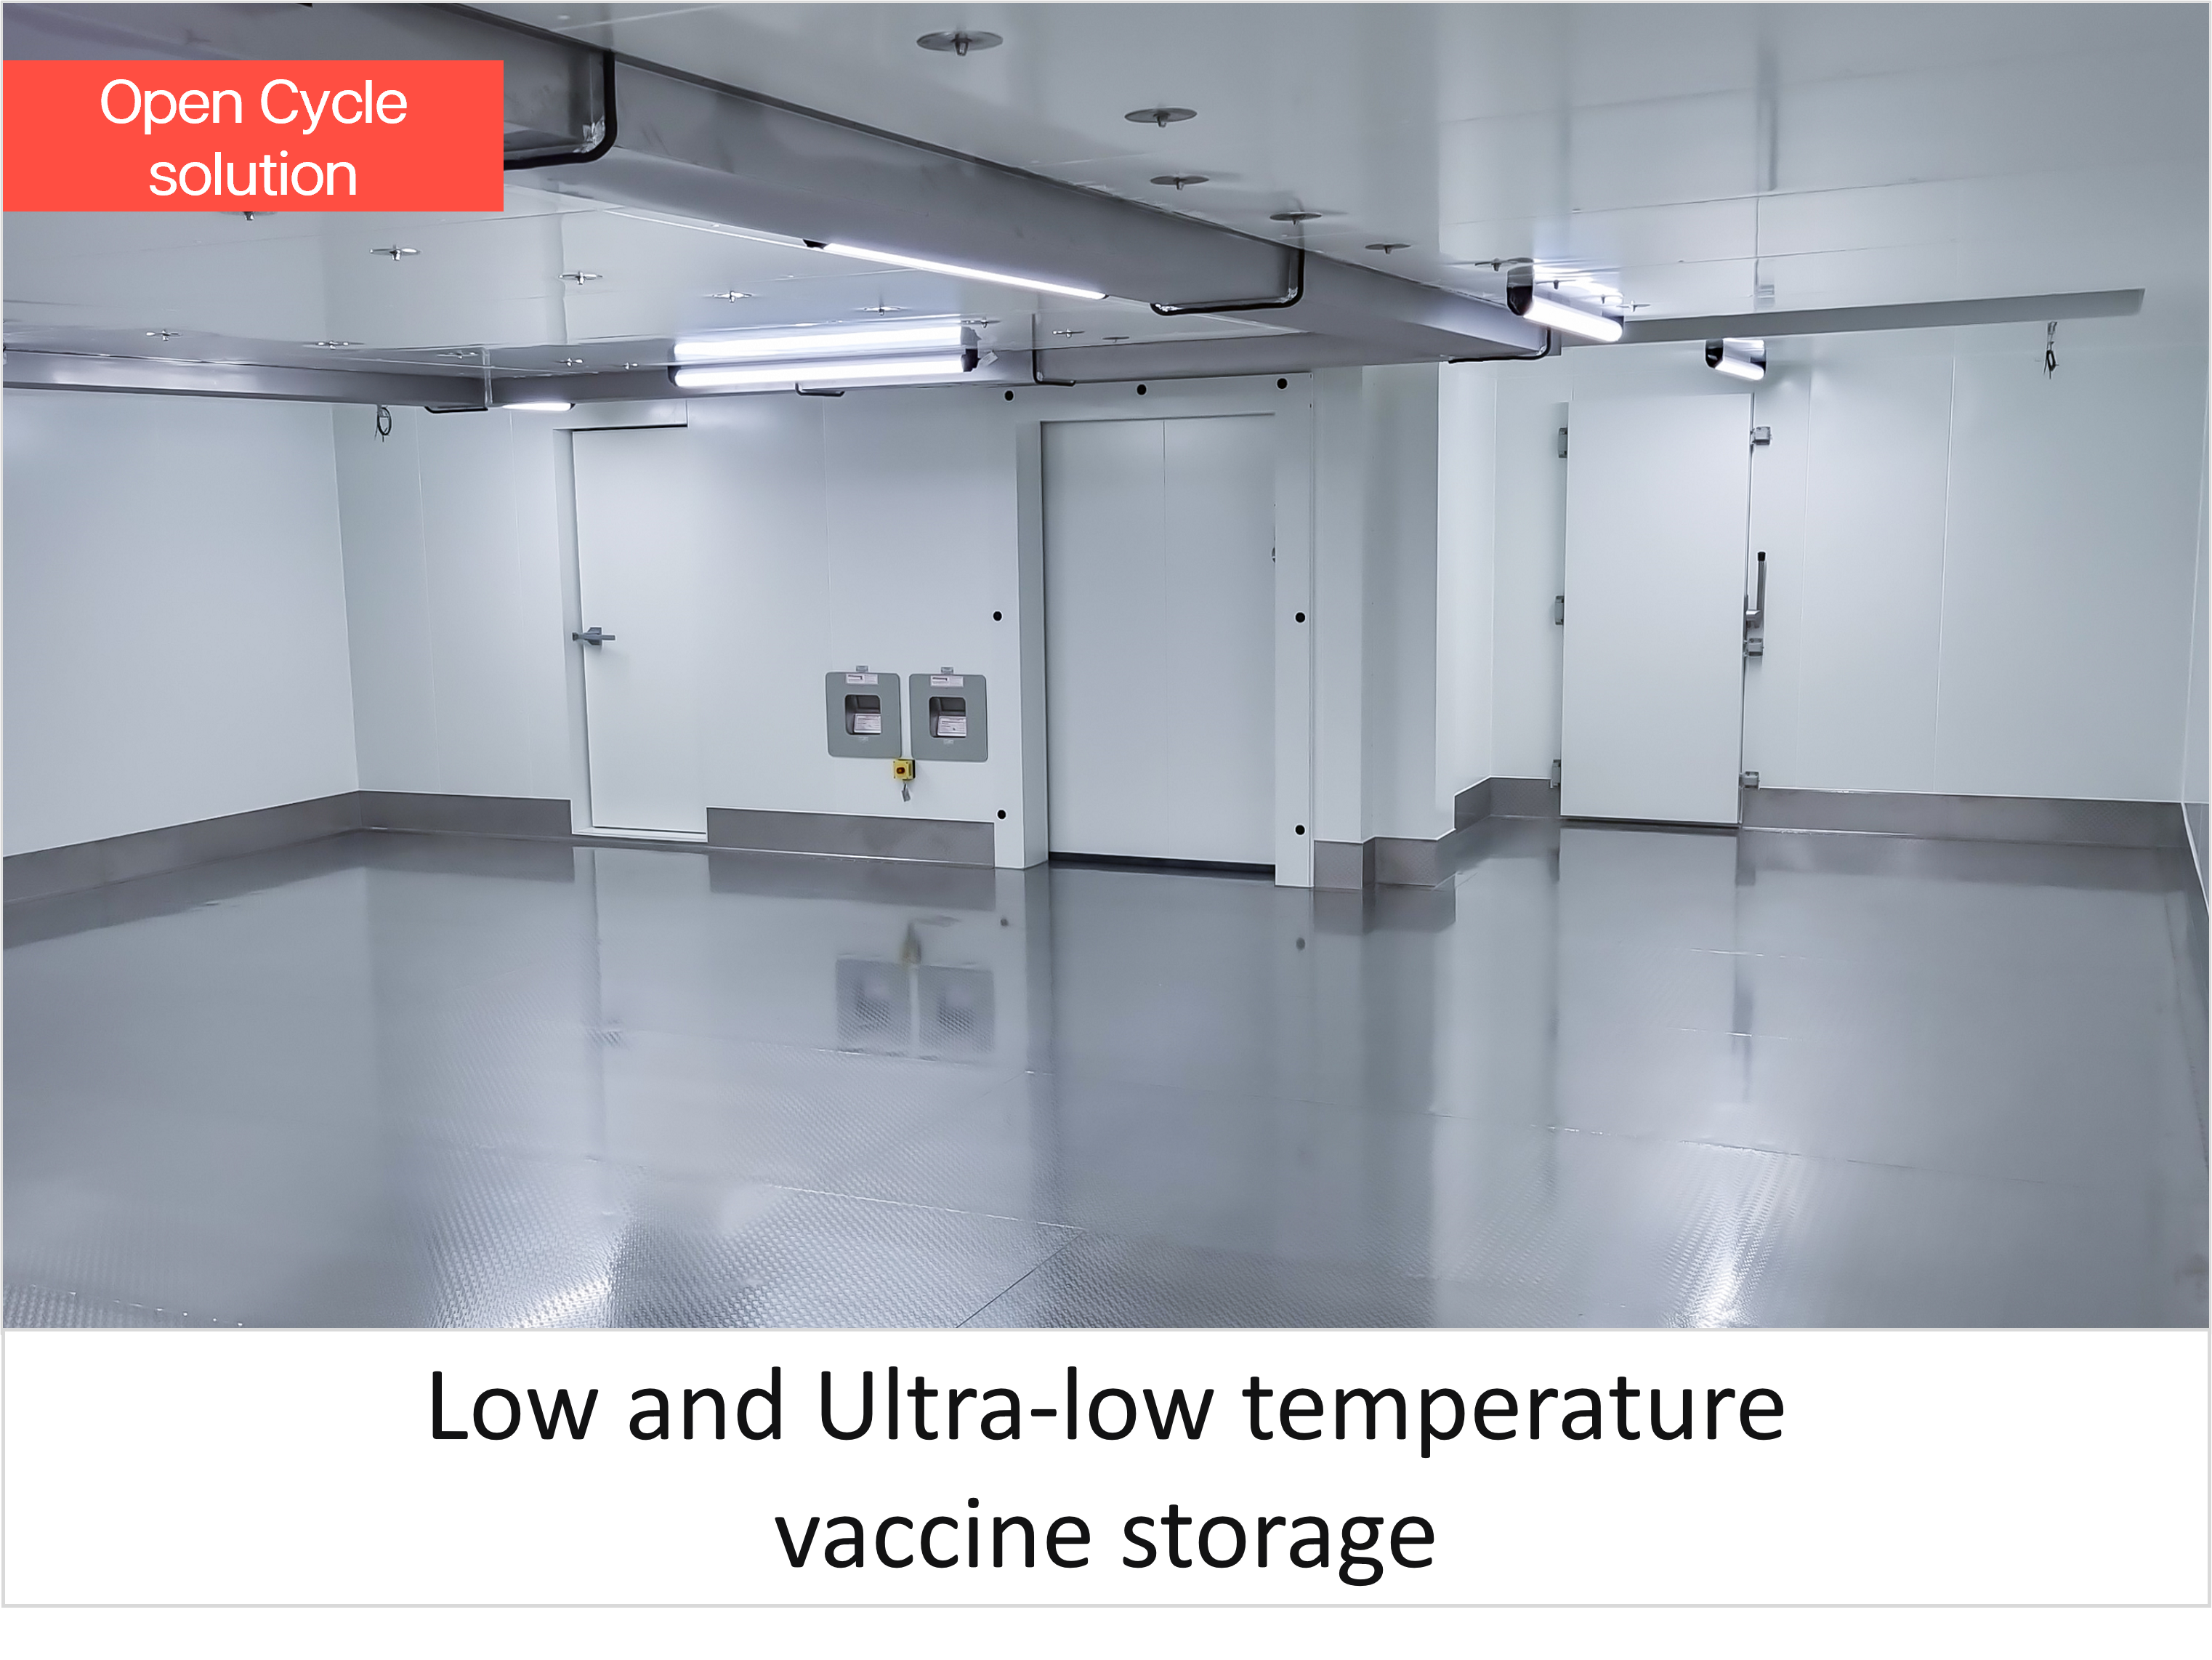 Low and Ultra-low temperature vaccine storage